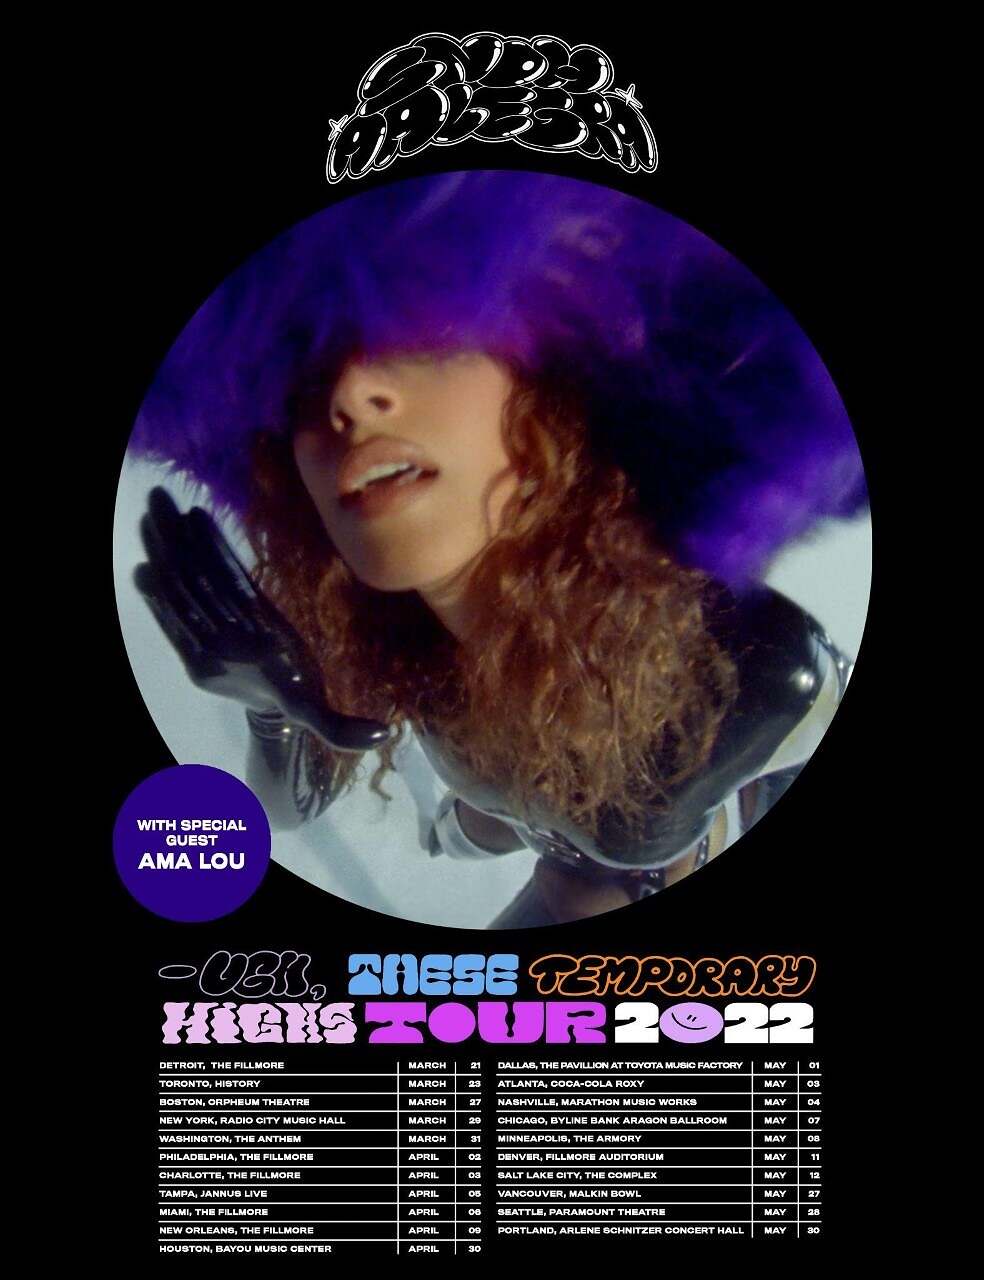 Snoh Aalegra Announces 2022 North American 'Ugh, These Temporary Highs Tour'